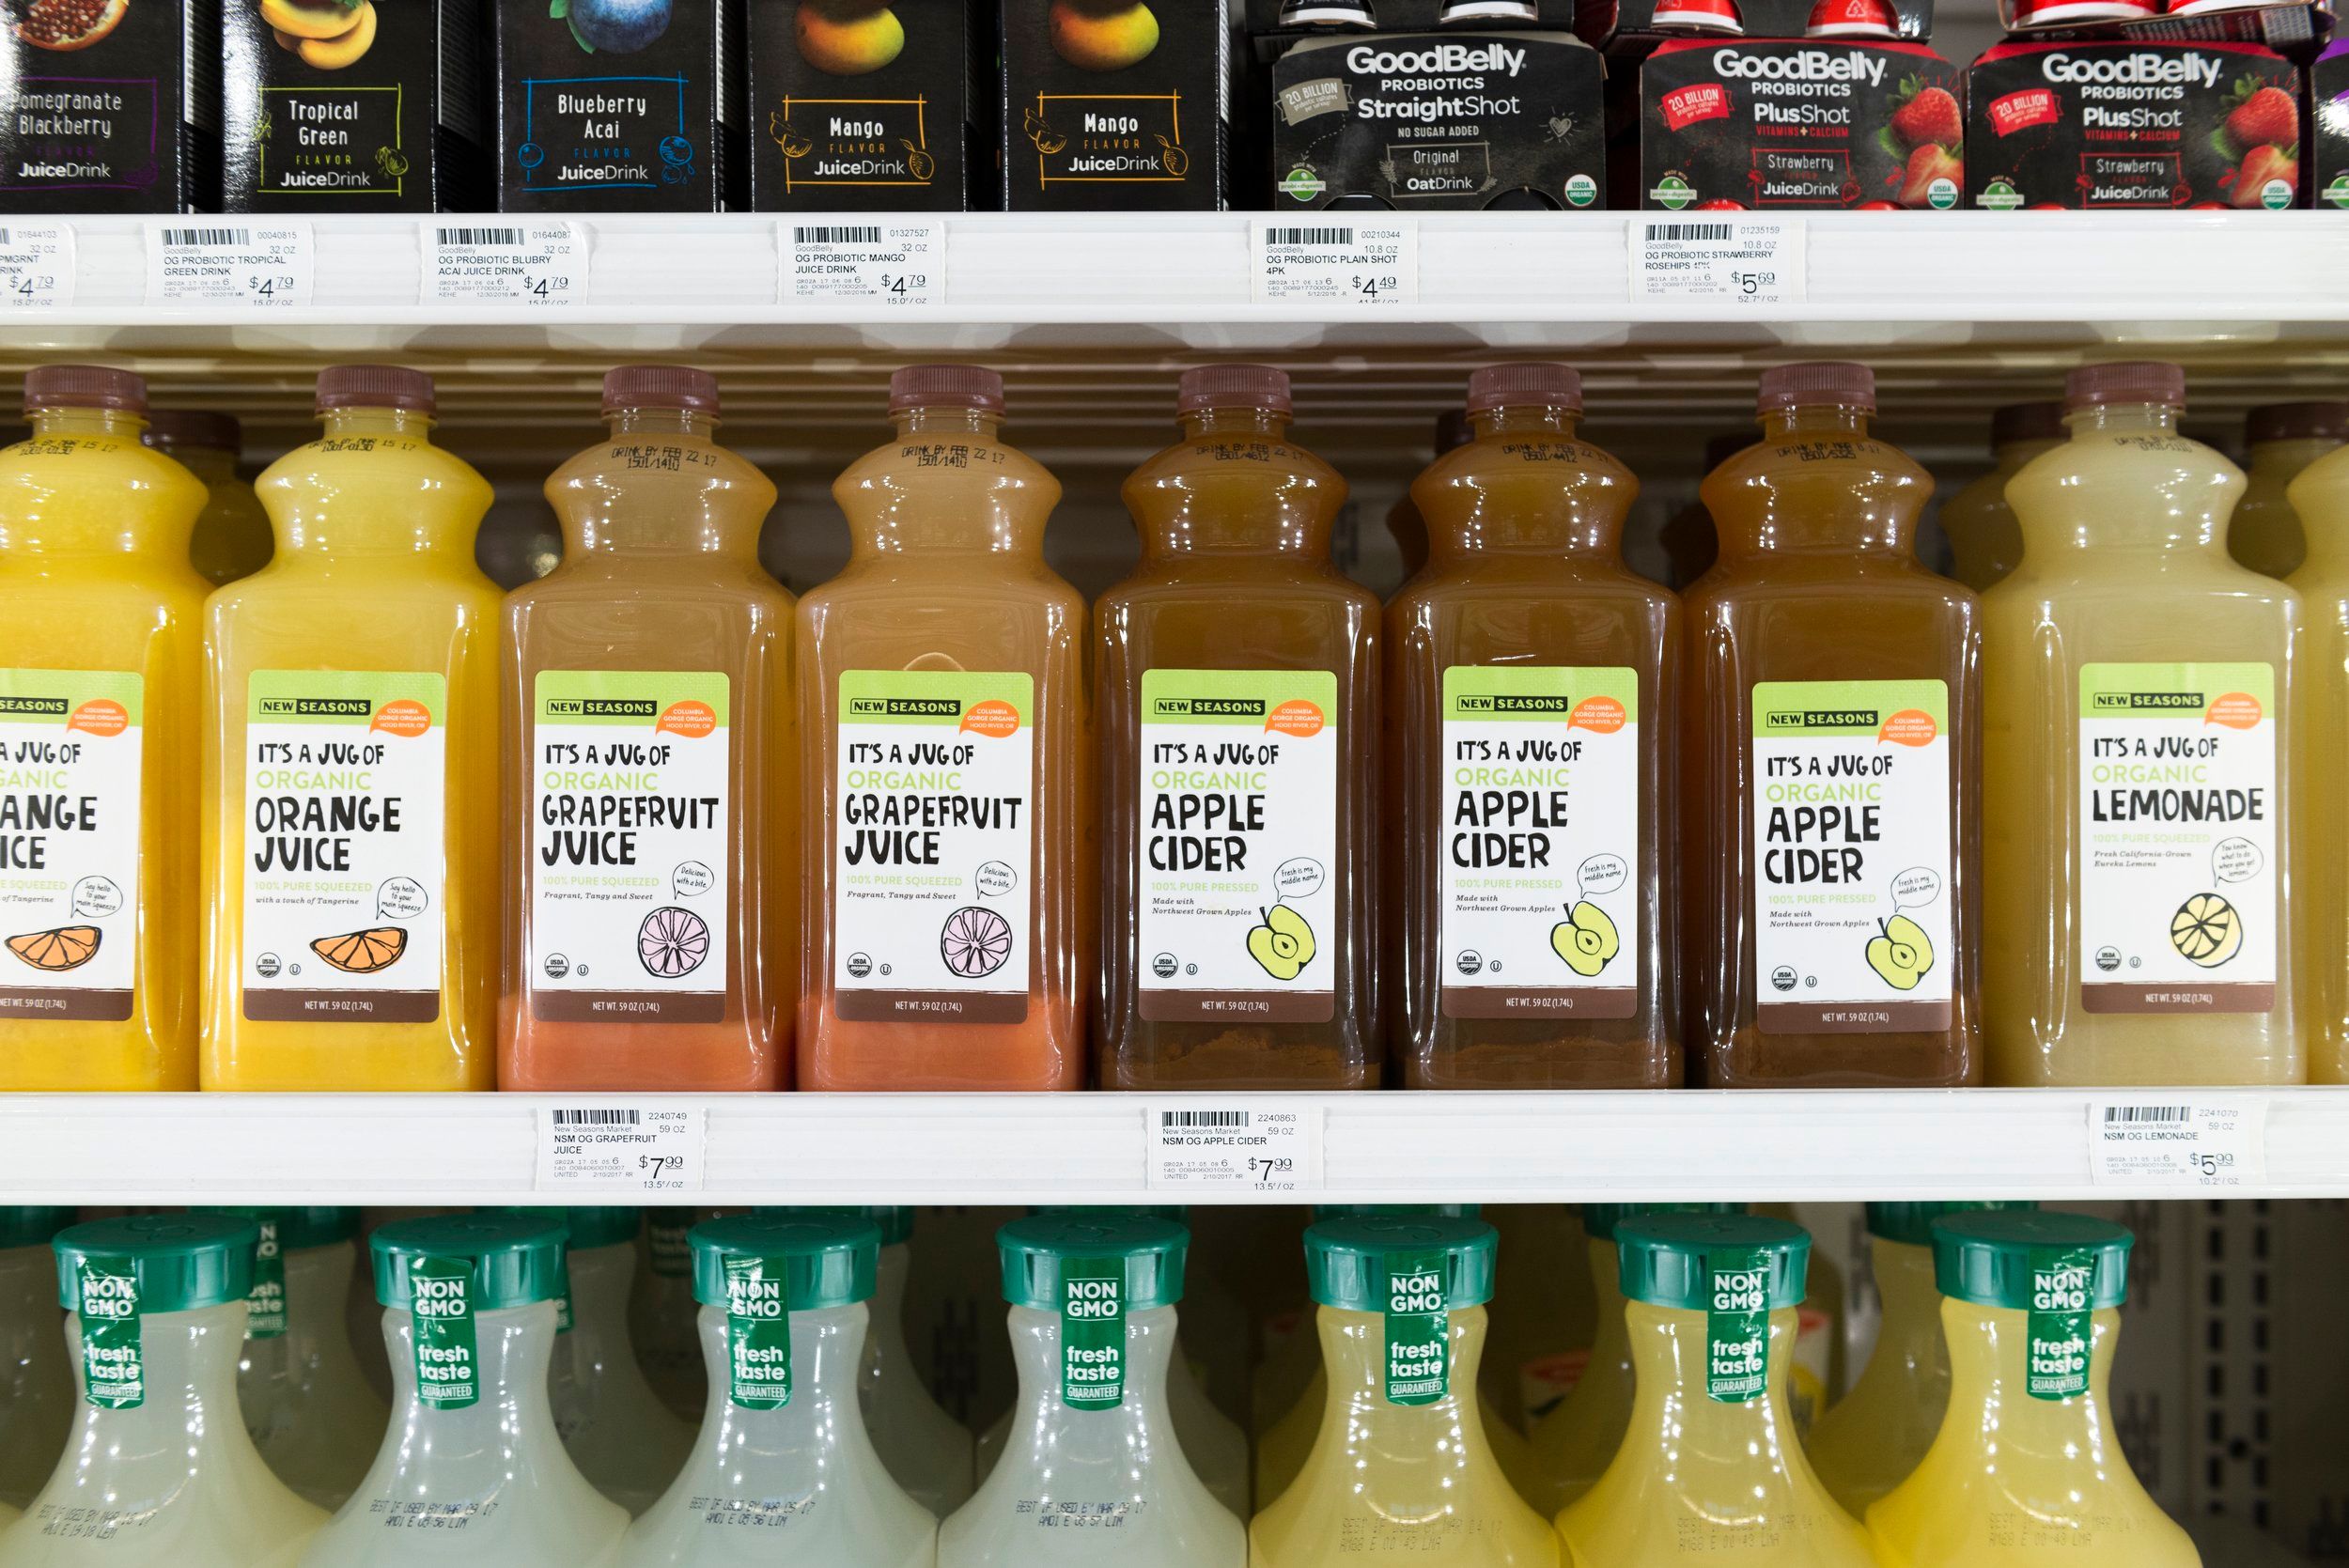 A row of juices made by New Seasons including orange juice, grapefruit juice, and apple cider, placed in a refrigerator next to other brands of juice